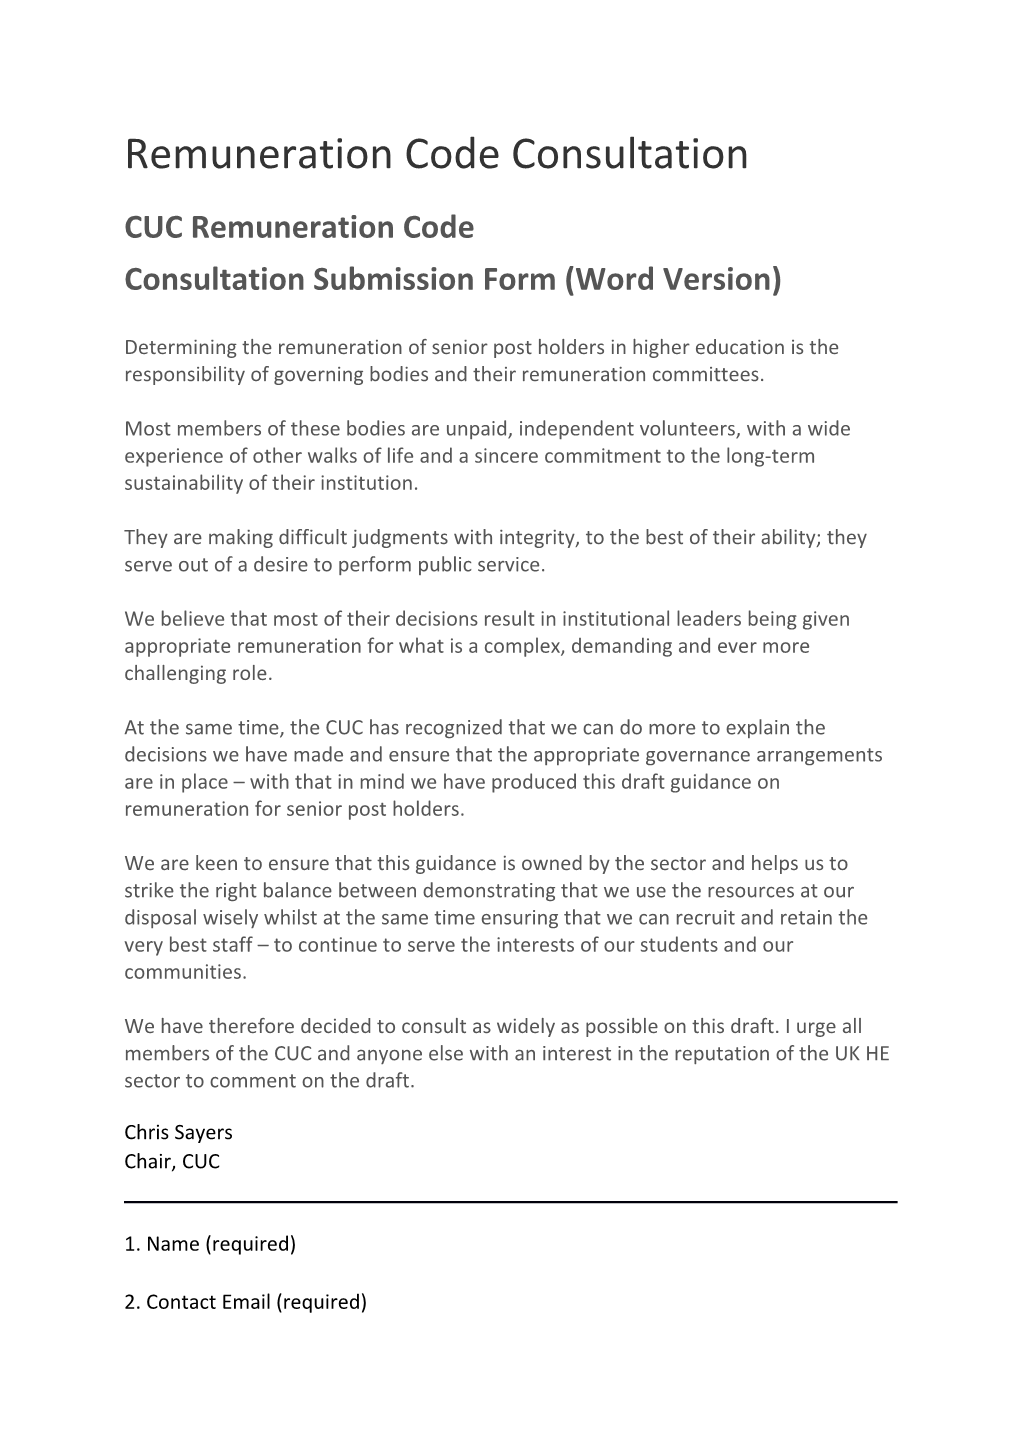 Consultation Submission Form (Word Version)